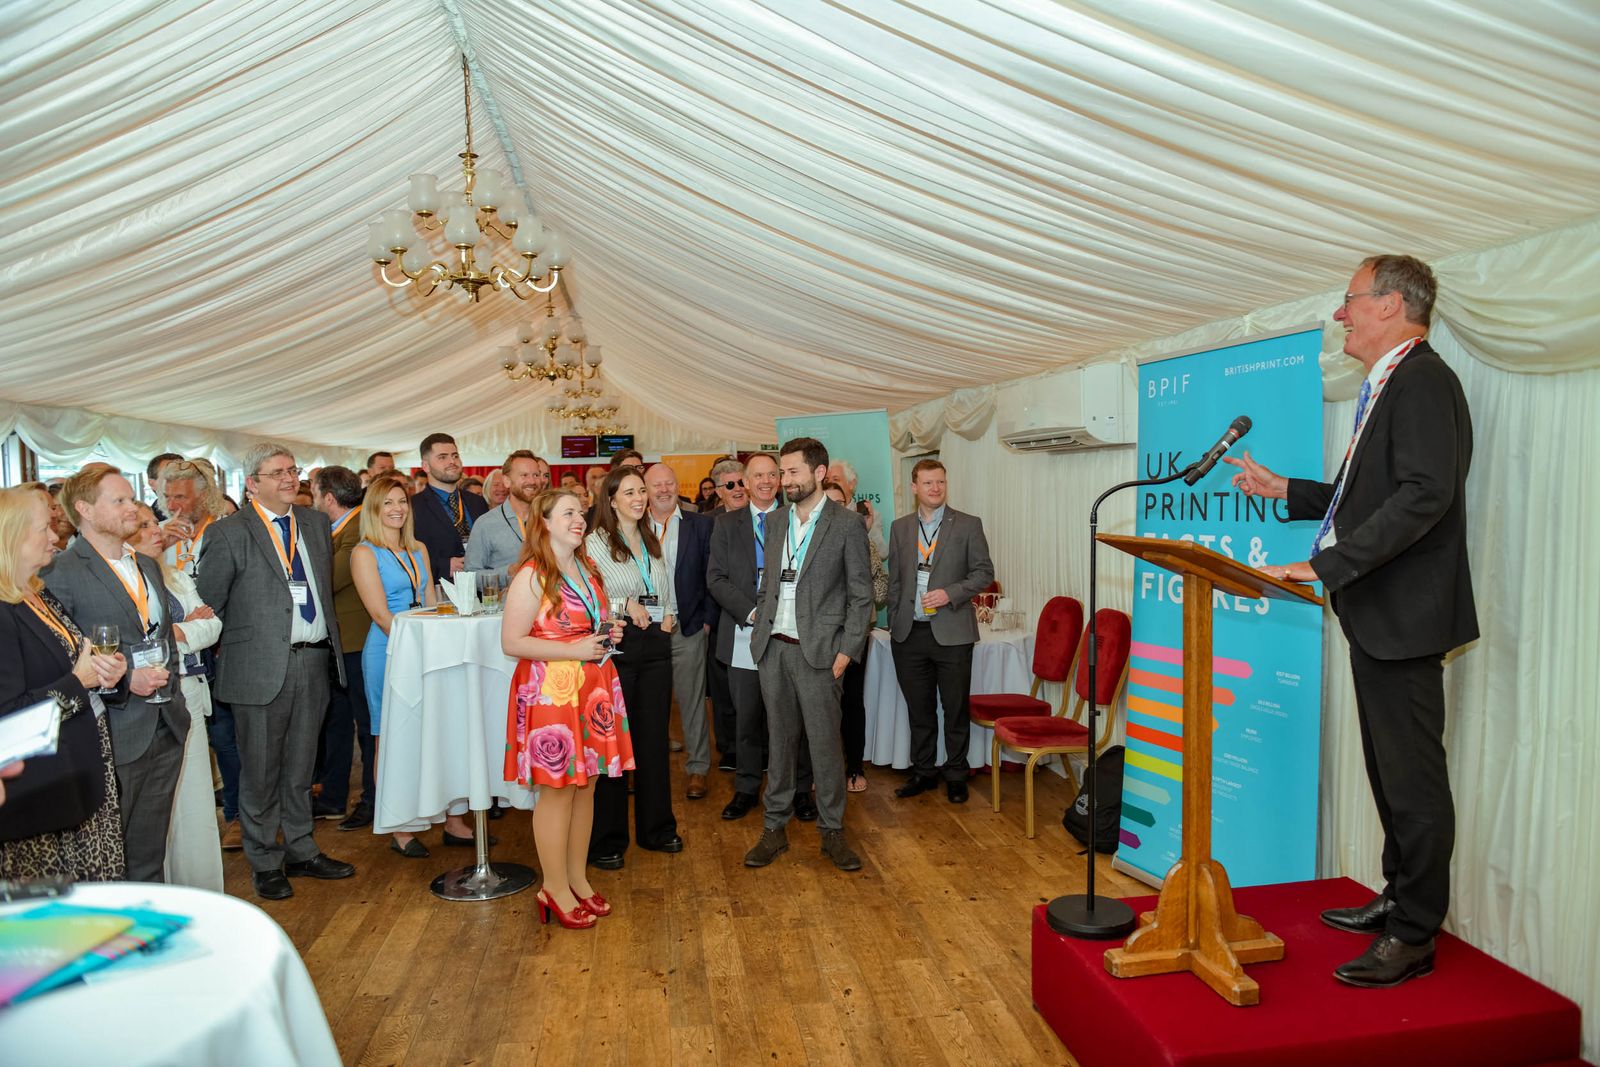 BPIF brings the print industry together at their Annual Print Reception